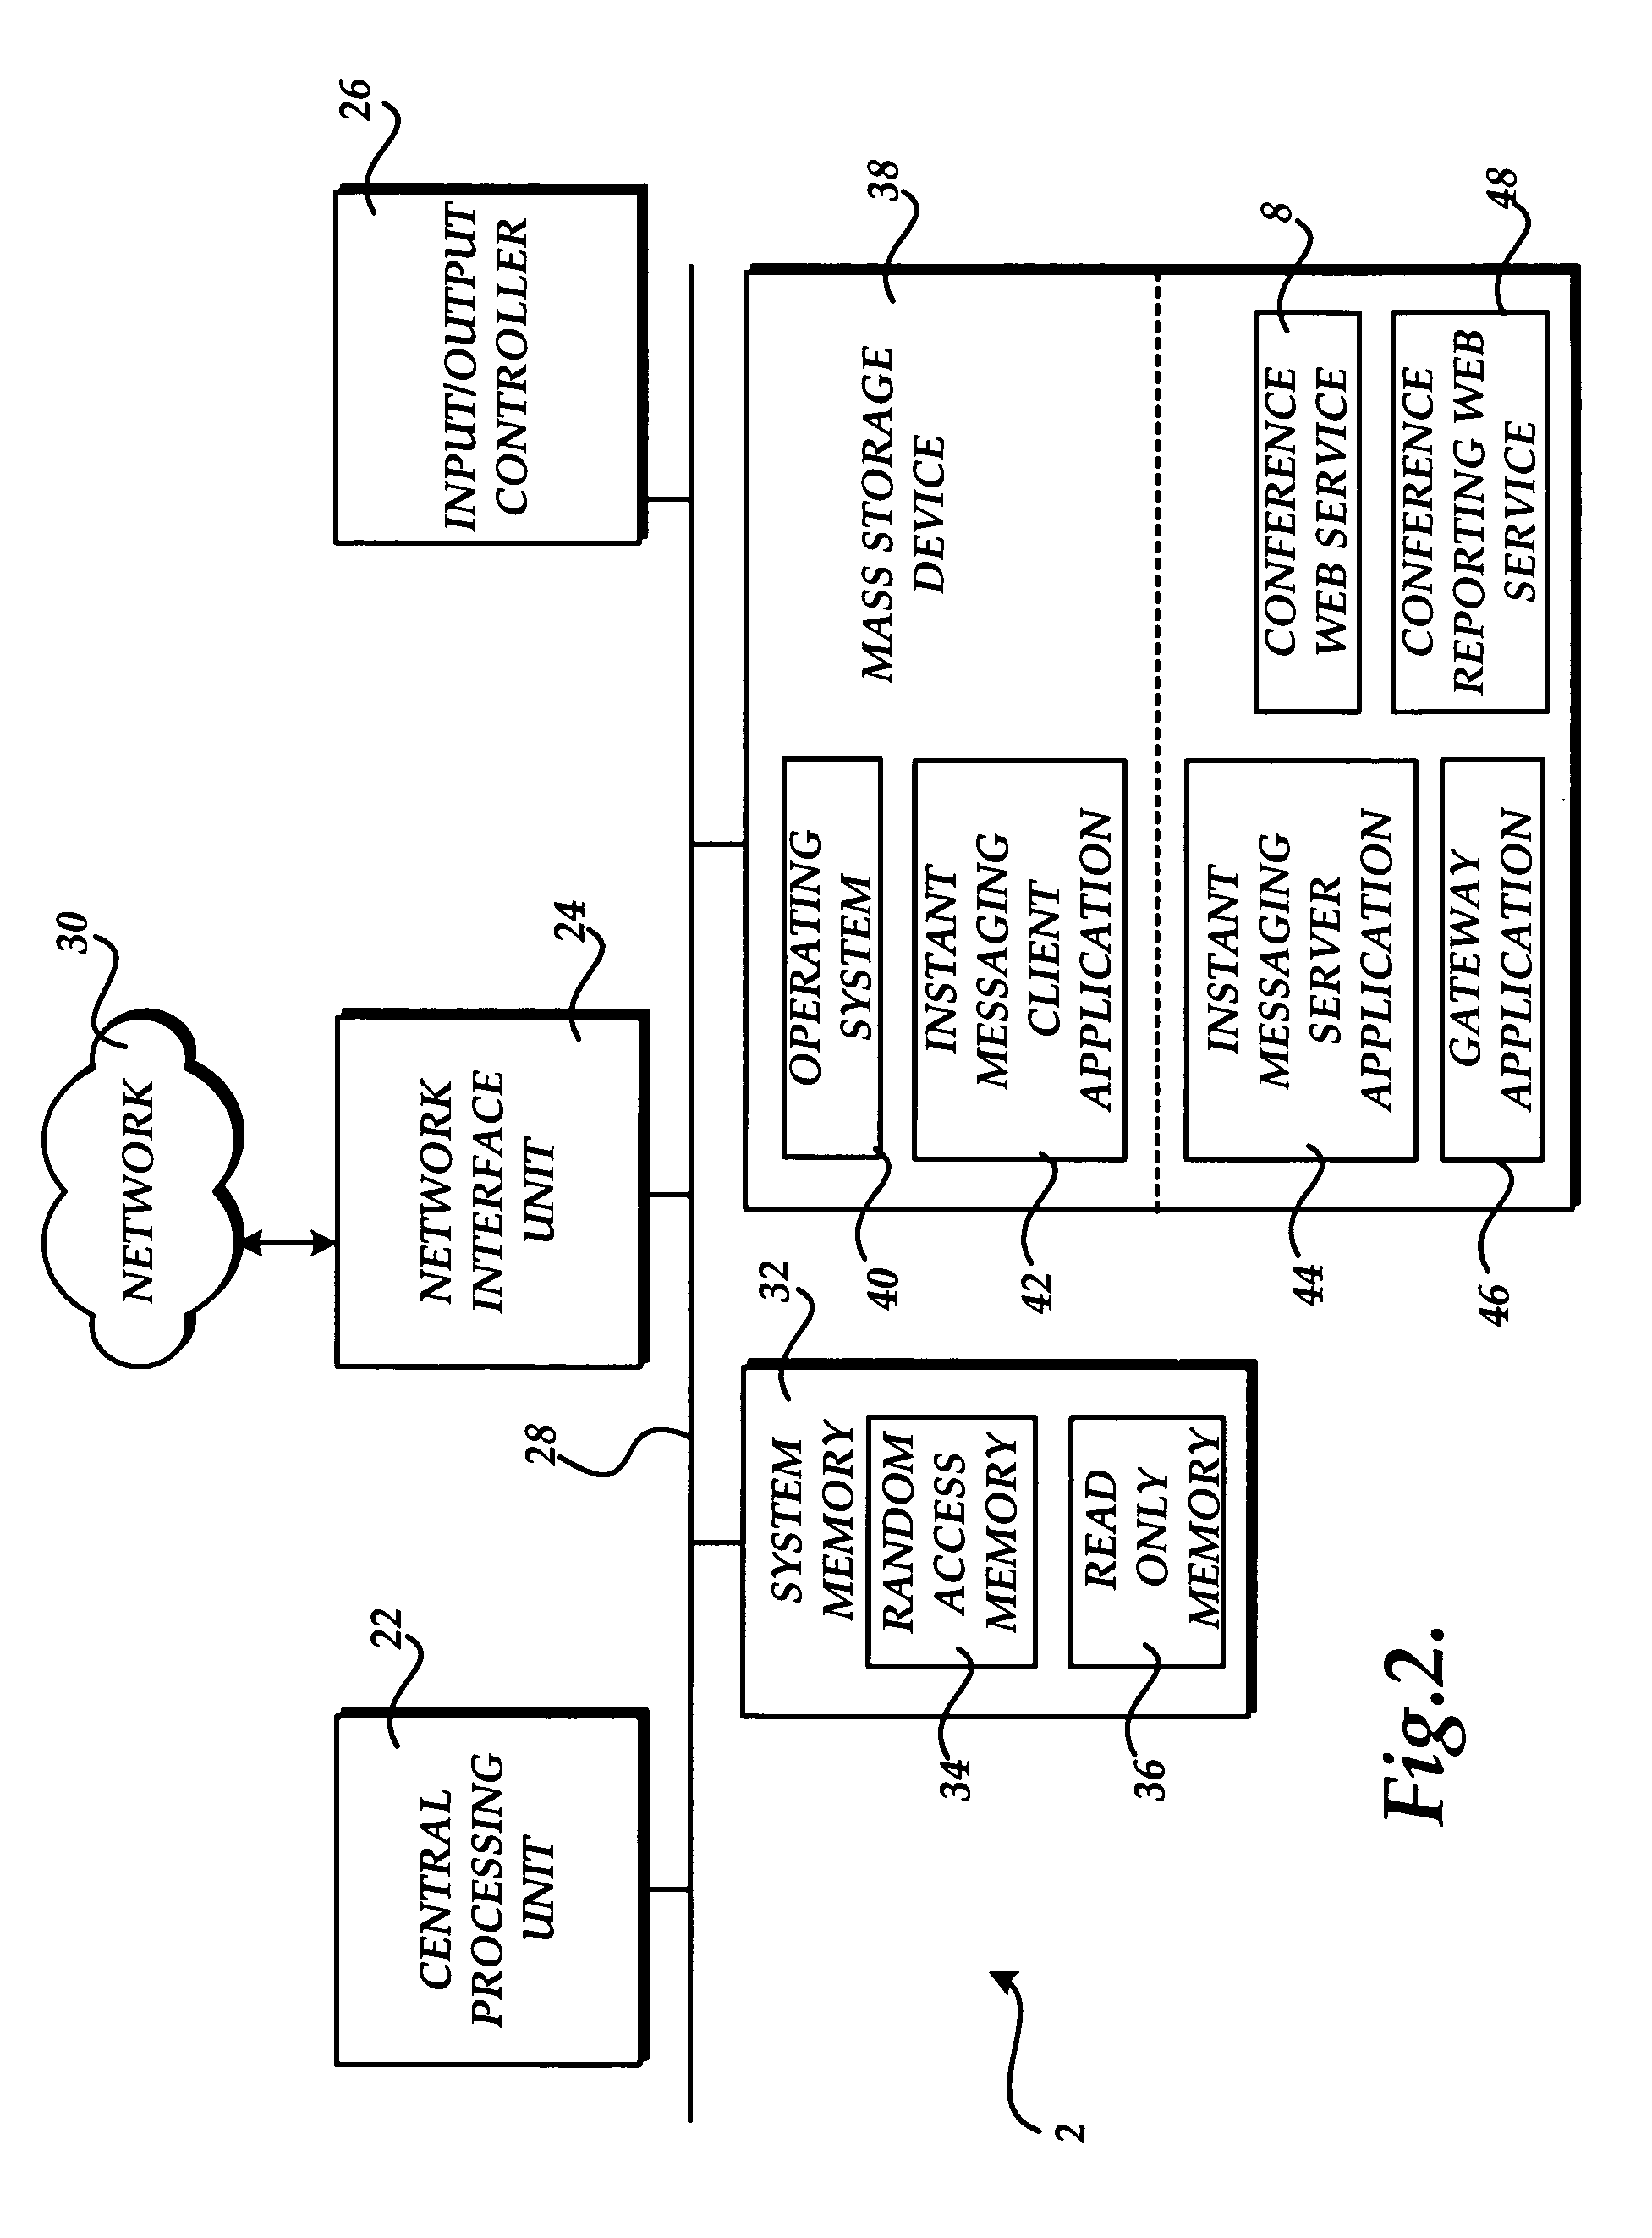 Method and system for providing an improved communications channel for telephone conference initiation and management